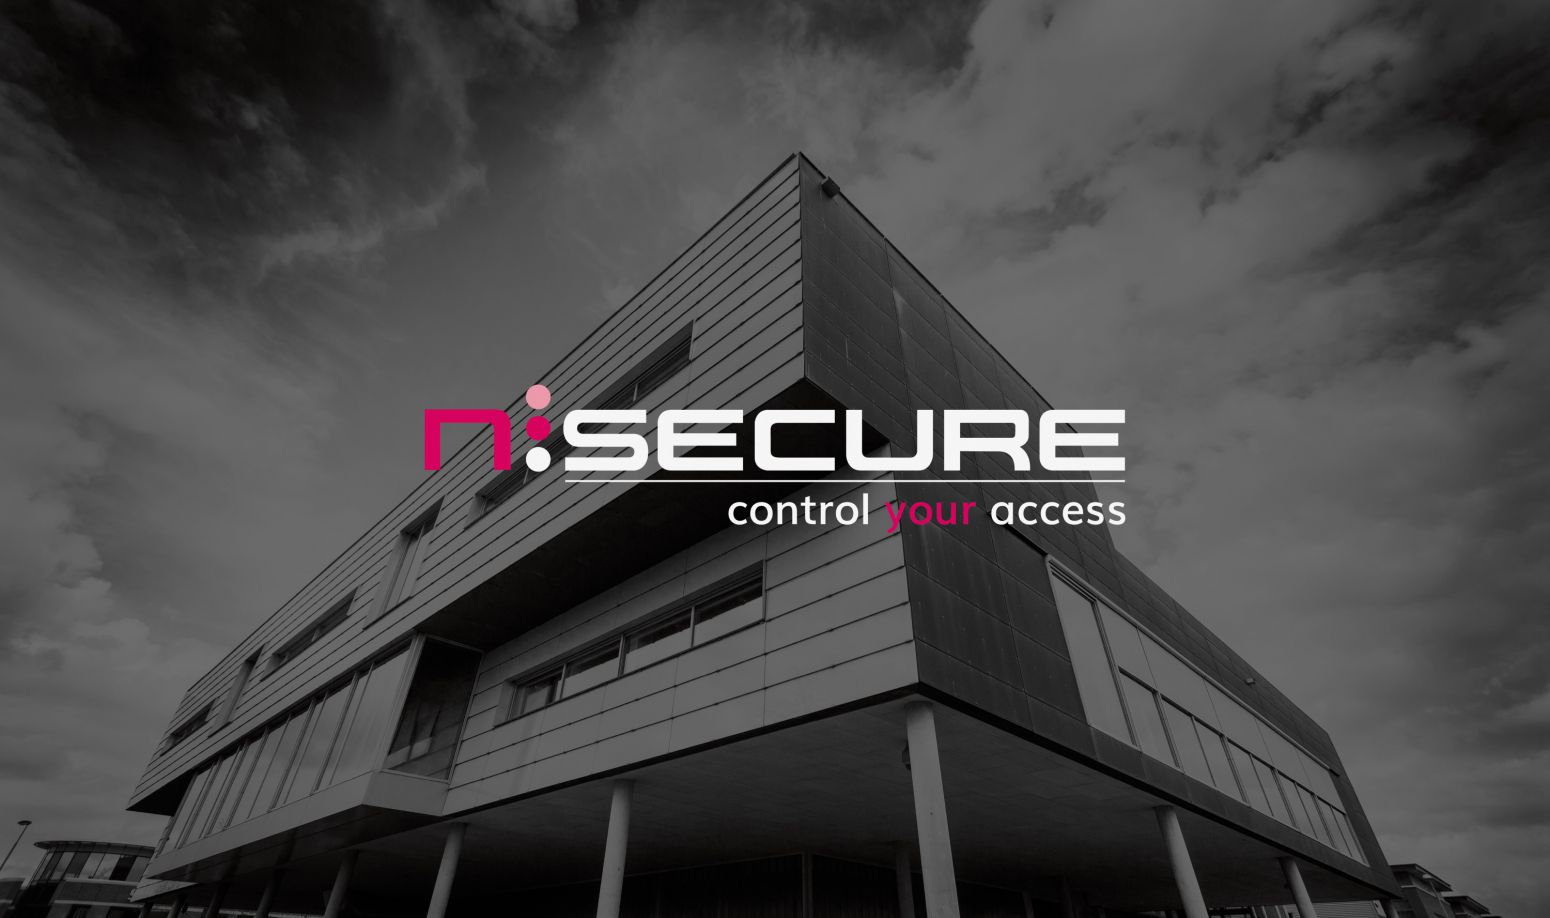 Nsecure - AGH & Friends